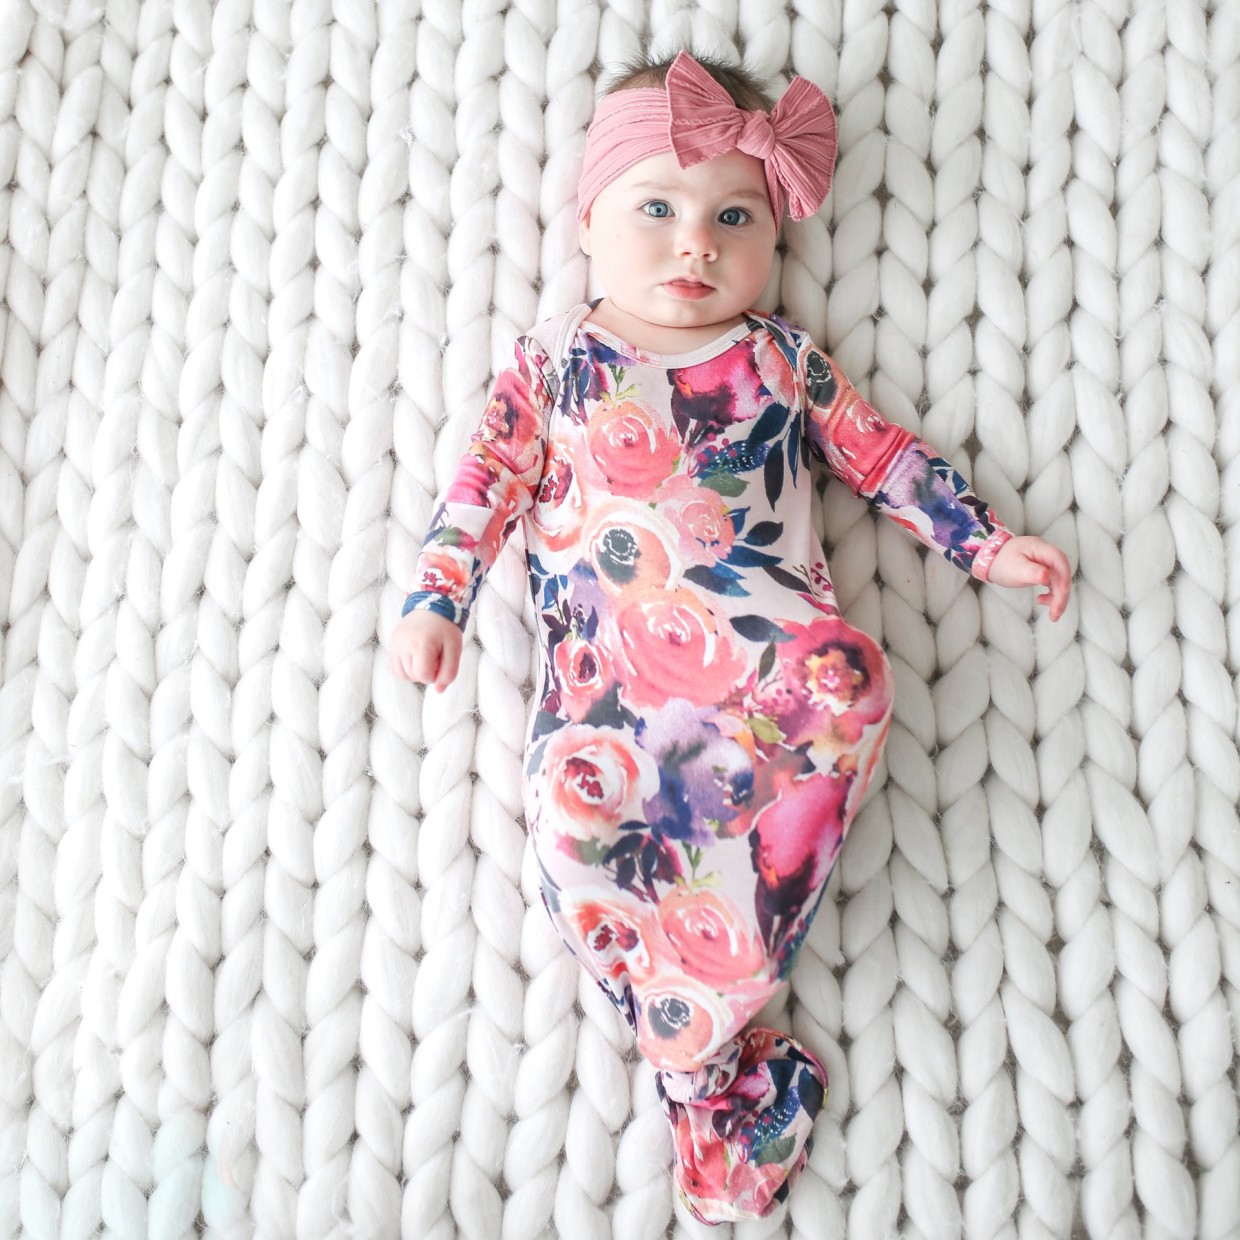 Posh Peanut Basic Knotted Gown - Dusk Rose, 0-3 Months.